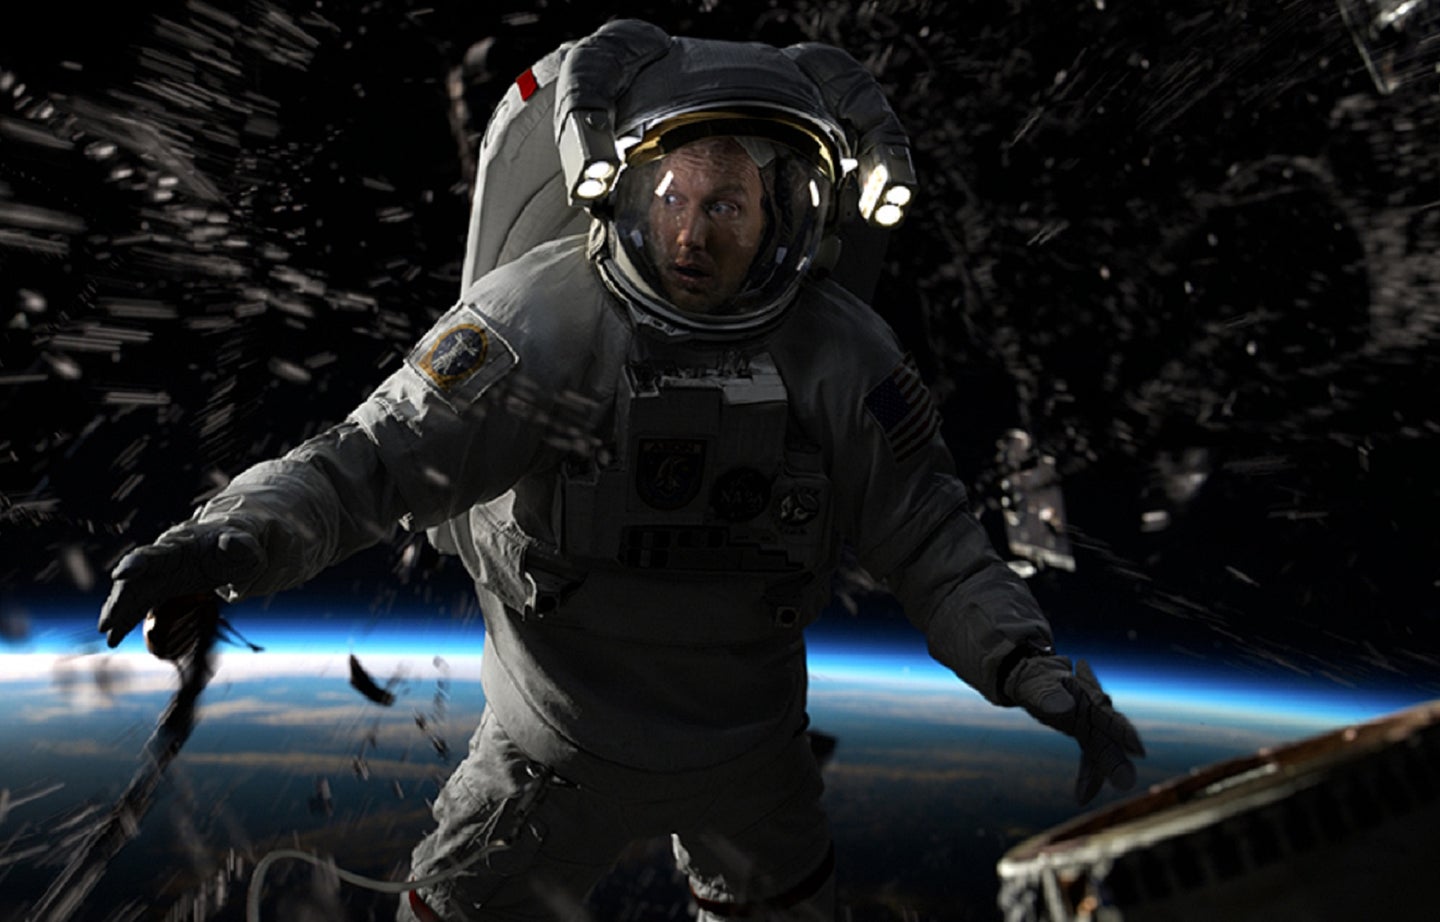 Patrick Wilson in an astronaut suit looking panicked in a Moonfall movie screenshot